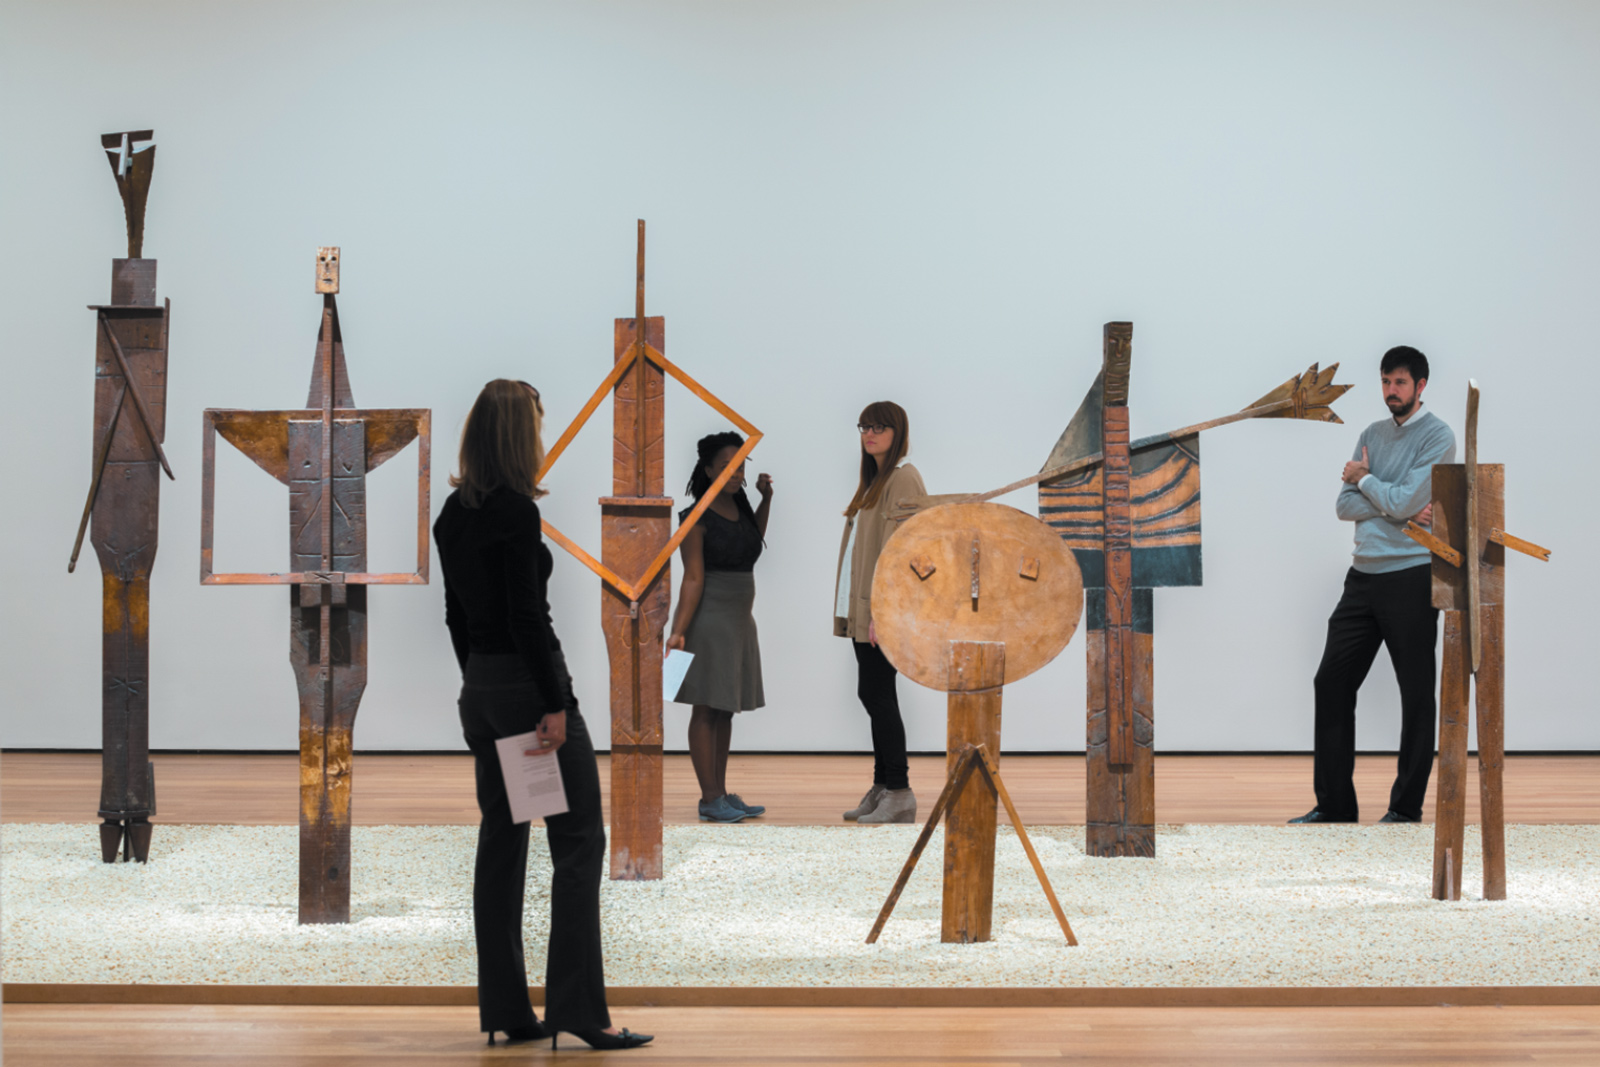 Works by Pablo Picasso in the exhibition ‘Picasso Sculpture’ at the Museum of Modern Art, New York City, 2015